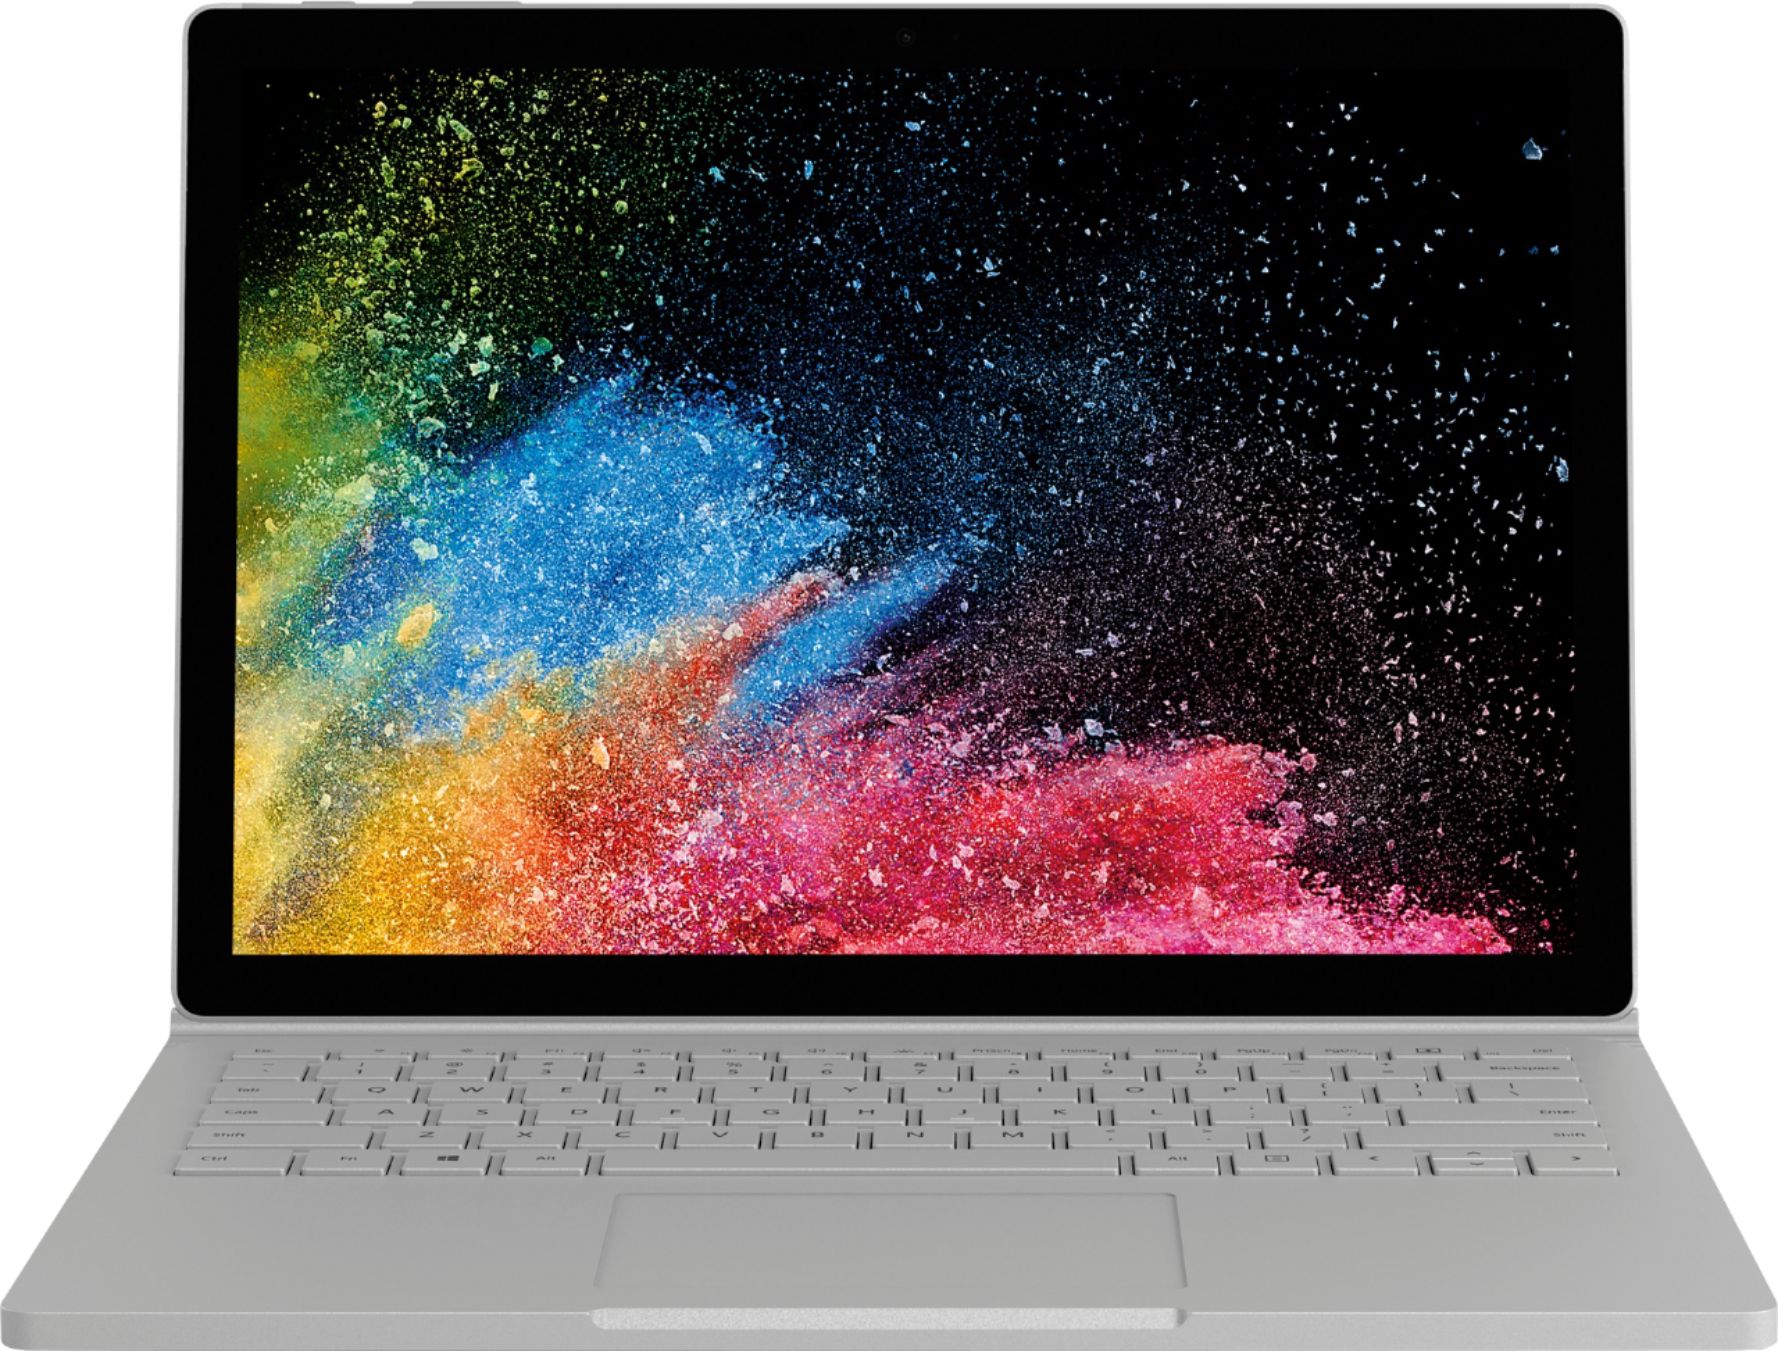 Angle View: Microsoft - Geek Squad Certified Refurbished Surface Laptop Go 12.4" Touch-Screen Laptop - Intel Core i5 - 4GB Memory - 64GB eMMC